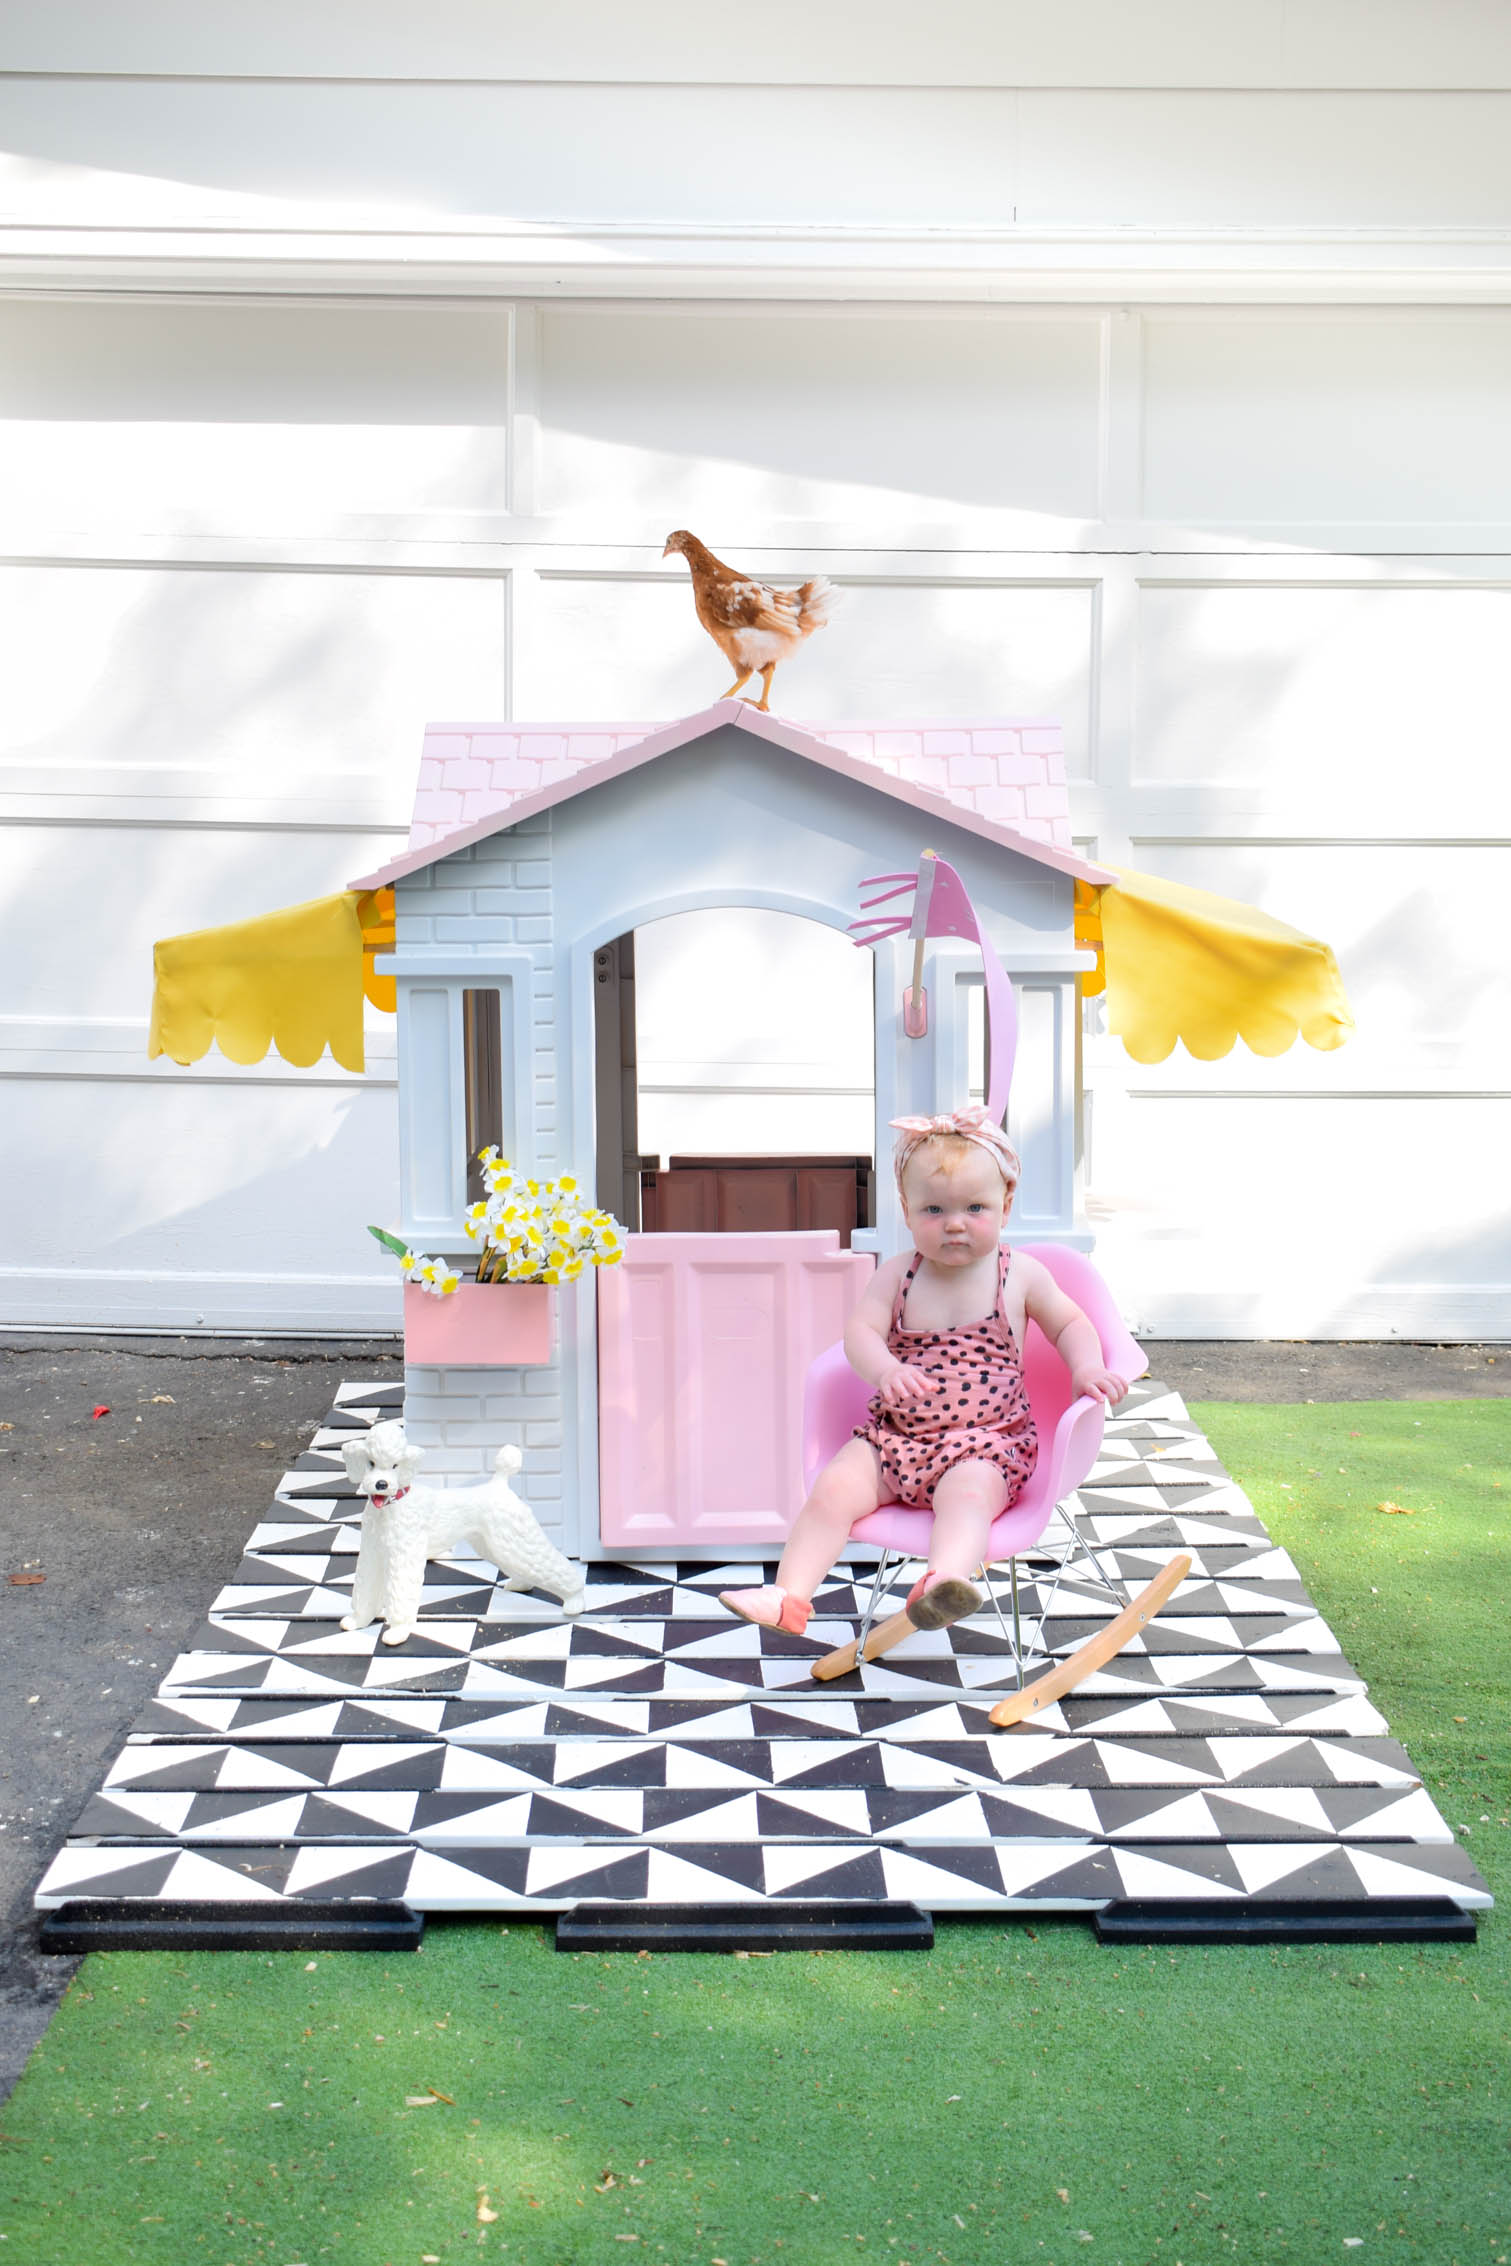 I completed a Mid Century Playhouse Makeover with a floating deck, painted to look like tiles. Easy! Come grab the tutorial and see the pics.